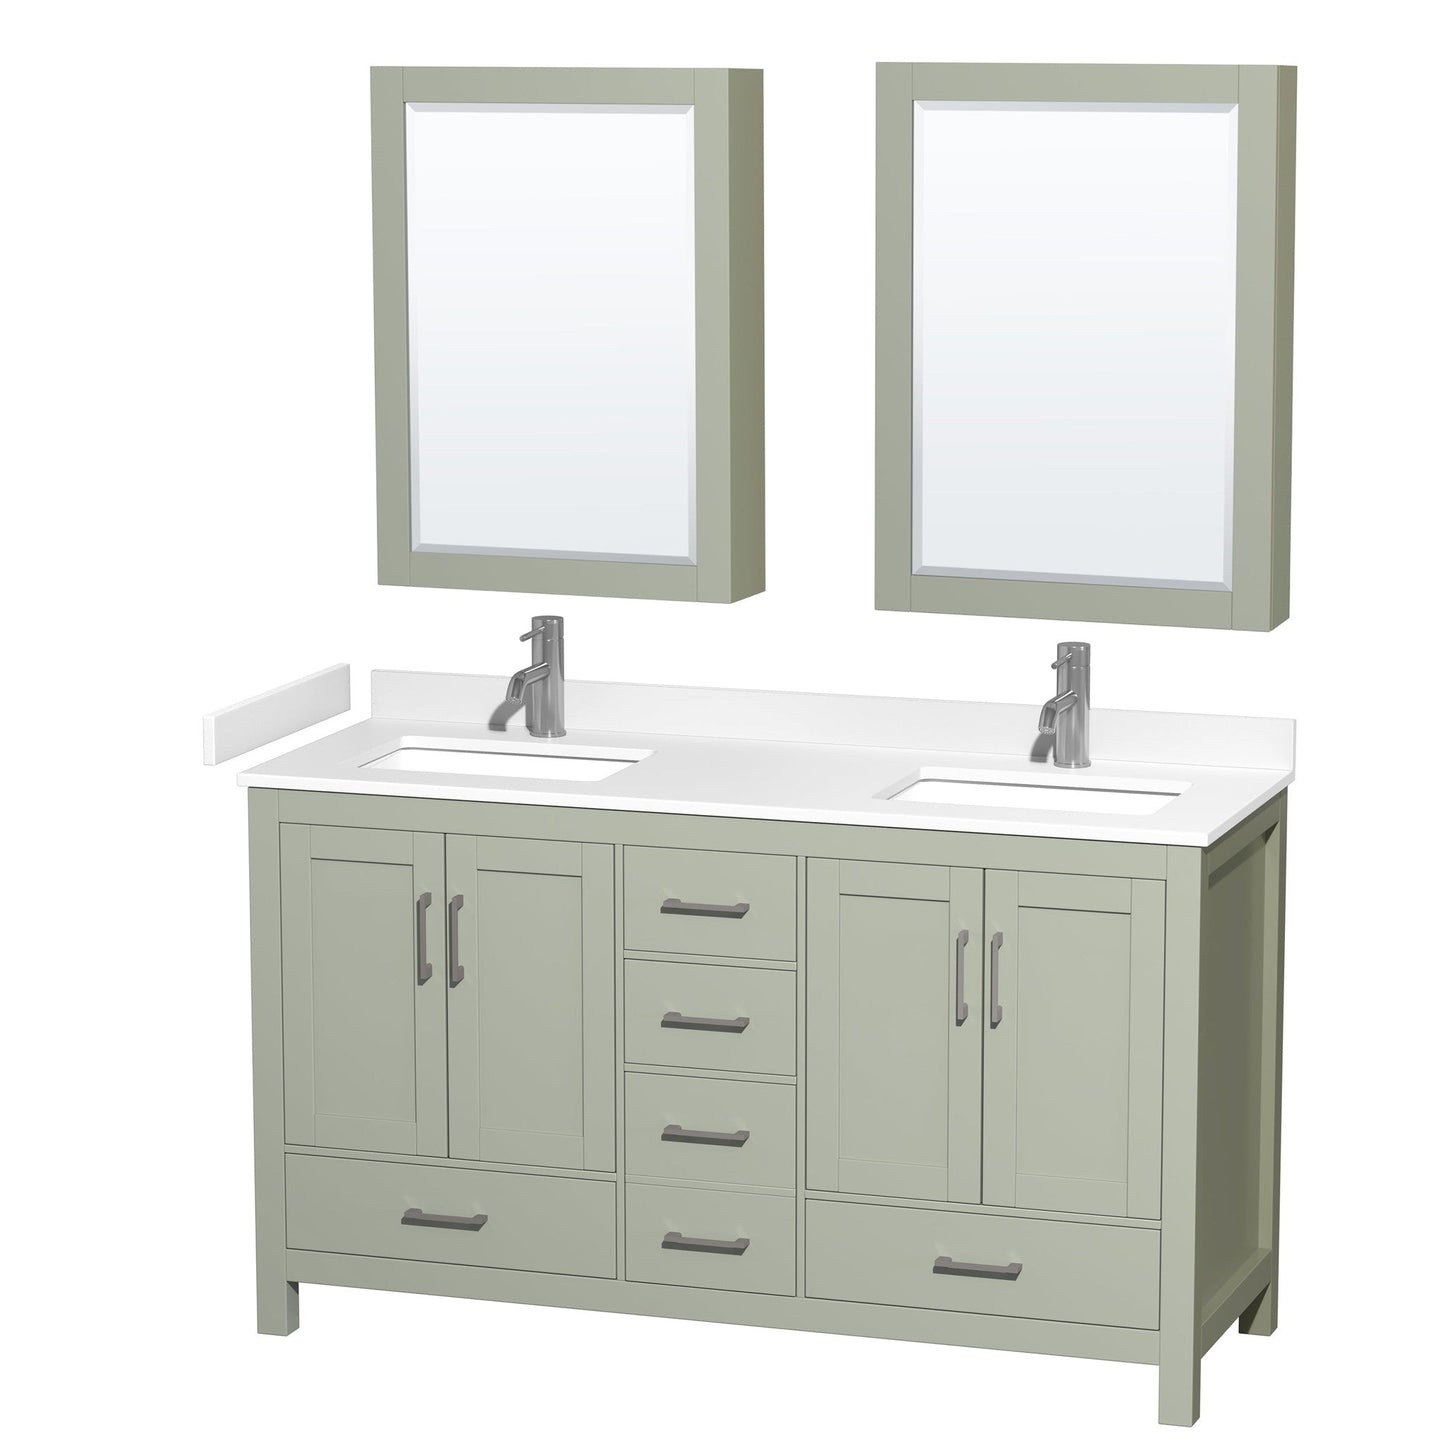 Sheffield 60" Double Bathroom Vanity in Light Green, White Cultured Marble Countertop, Undermount Square Sinks, Brushed Nickel Trim, Medicine Cabinets